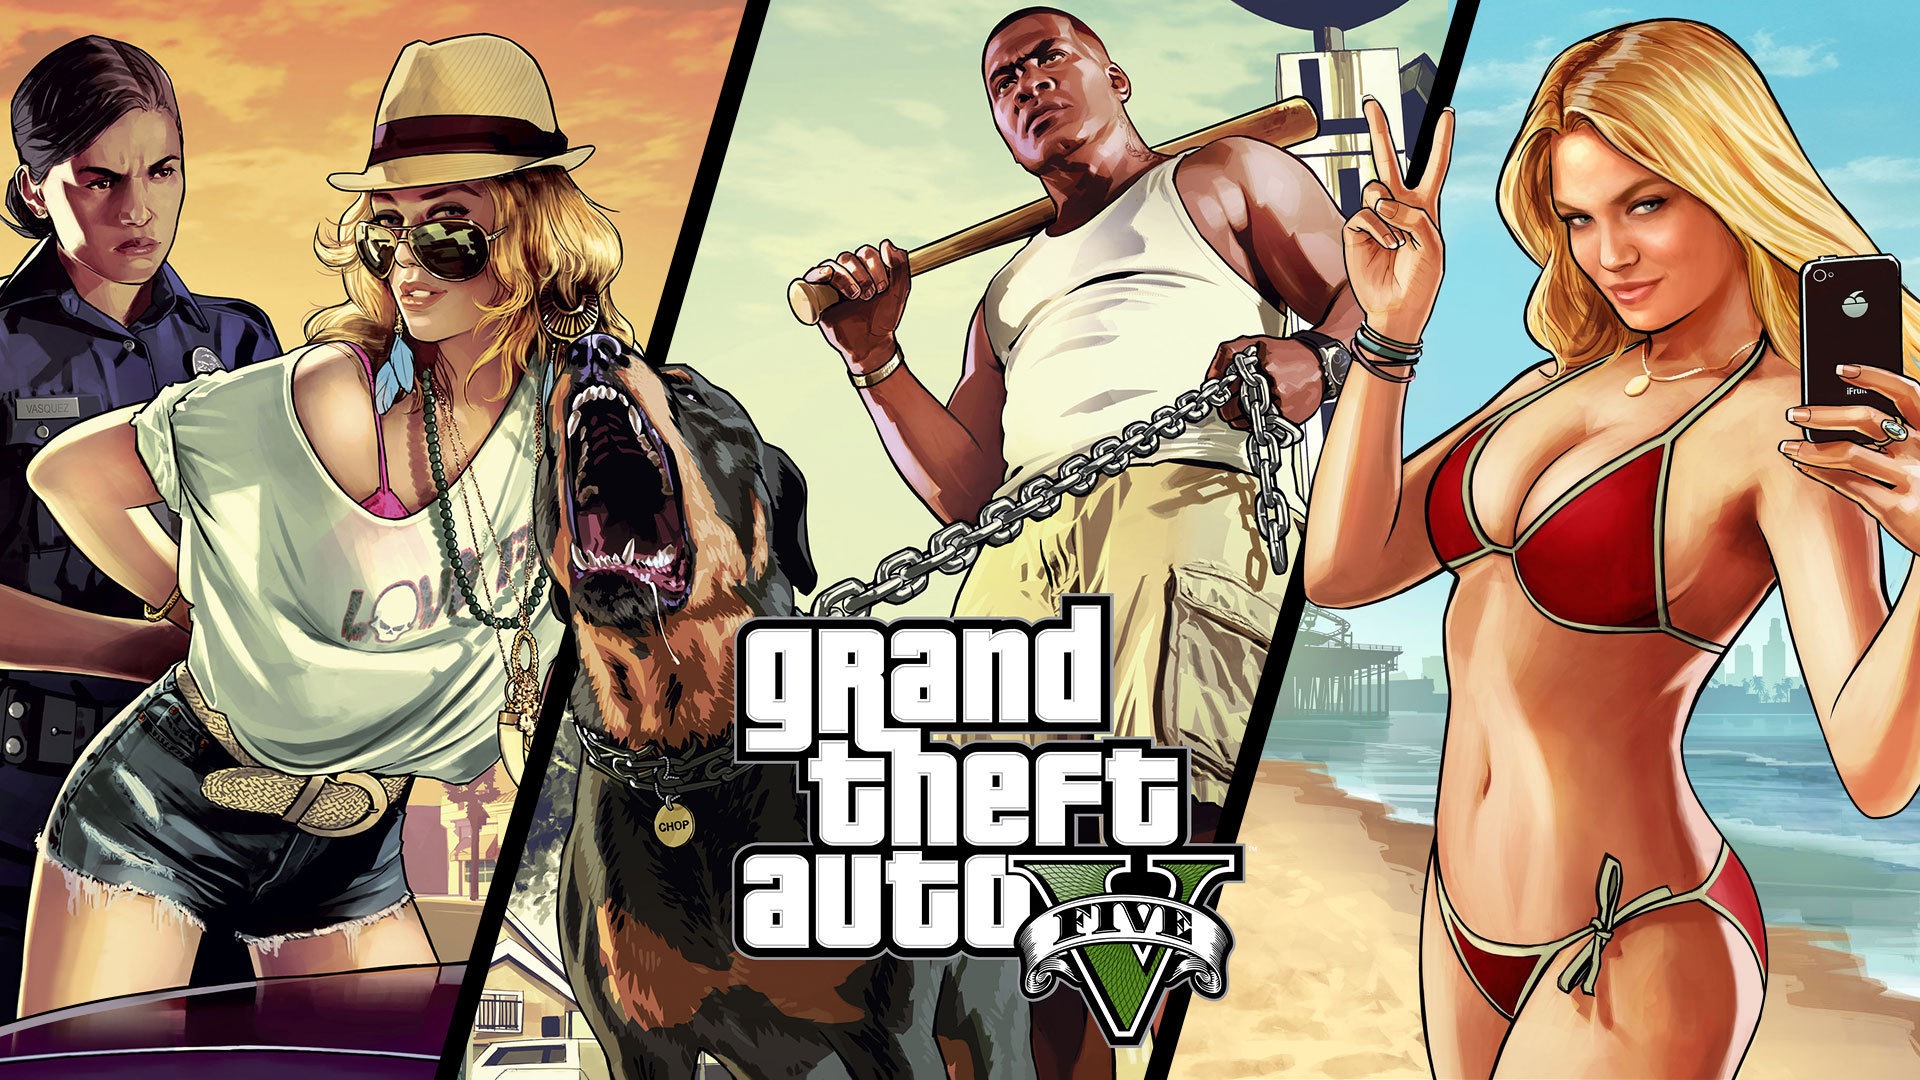 Grand Theft Auto V GTA 5 HD game wallpapers #17 - 1920x1080